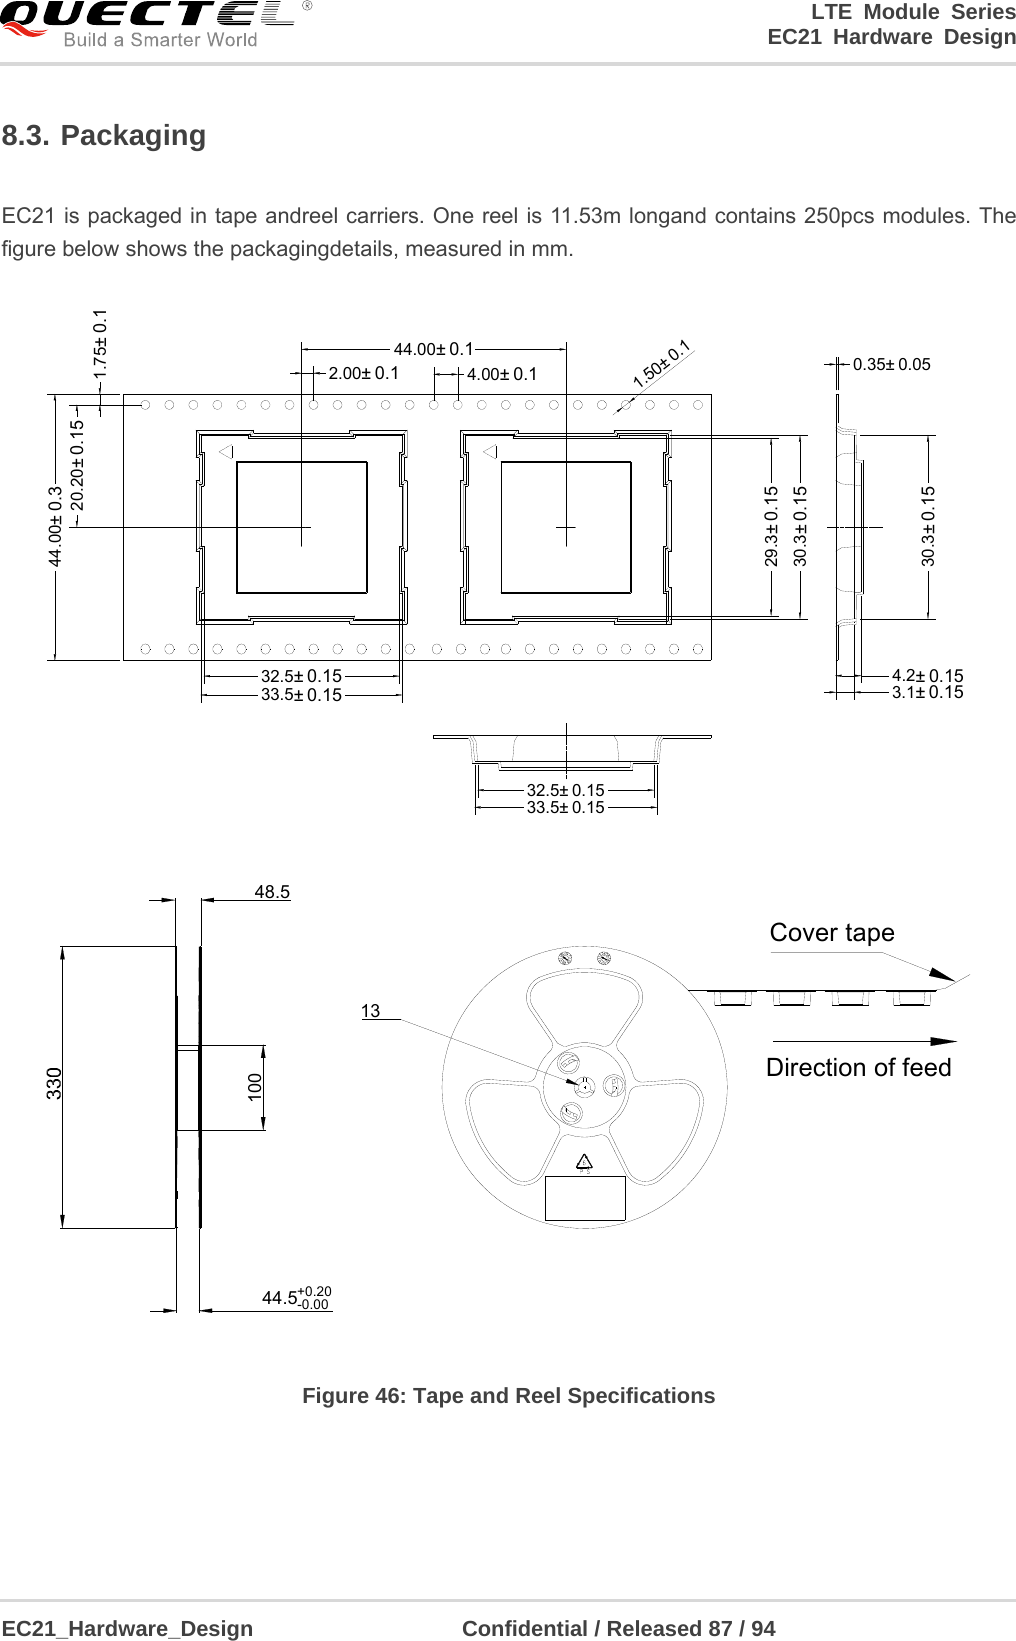 LTE Module Series                                                                 EC21 Hardware Design  EC21_Hardware_Design                   Confidential / Released 87 / 94    8.3. Packaging  EC21 is packaged in tape andreel carriers. One reel is 11.53m longand contains 250pcs modules. The figure below shows the packagingdetails, measured in mm. 30.3±0.1529.3±0.1530.3±0.1532.5±0.1533.5±0.150.35± 0.054.2±0.153.1±0.1532.5± 0.1533.5± 0.154.00±0.12.00±0.11.75±0.120.20±0.1544.00±0.344.00±0.11.50±0.1 1310044.5+0.20-0.0048.5 Figure 46: Tape and Reel Specifications  